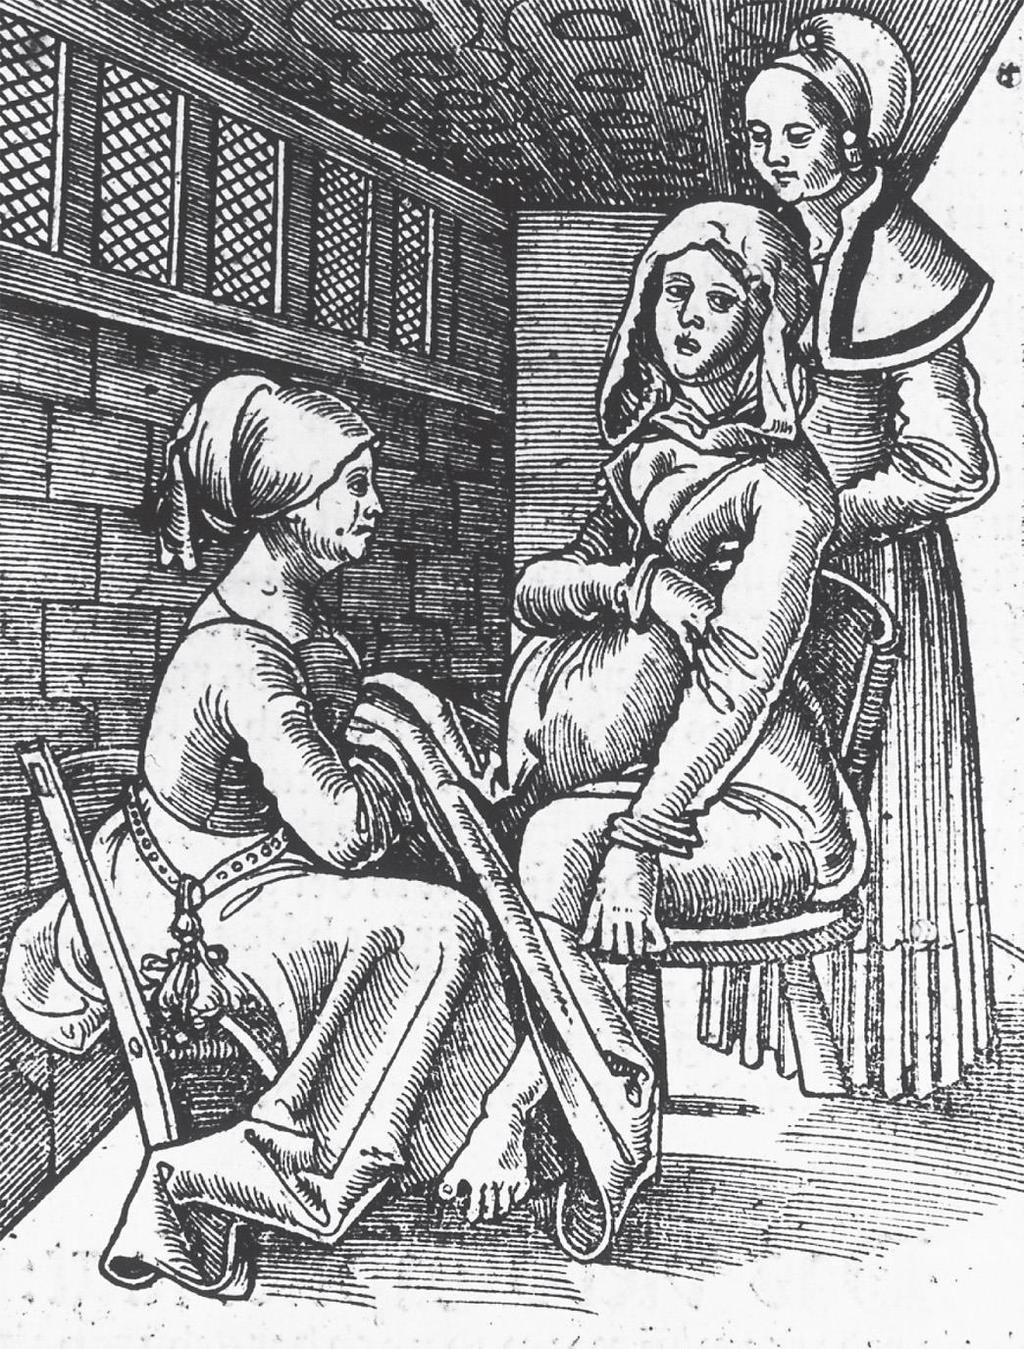 Until well into the eighteenth century, midwives